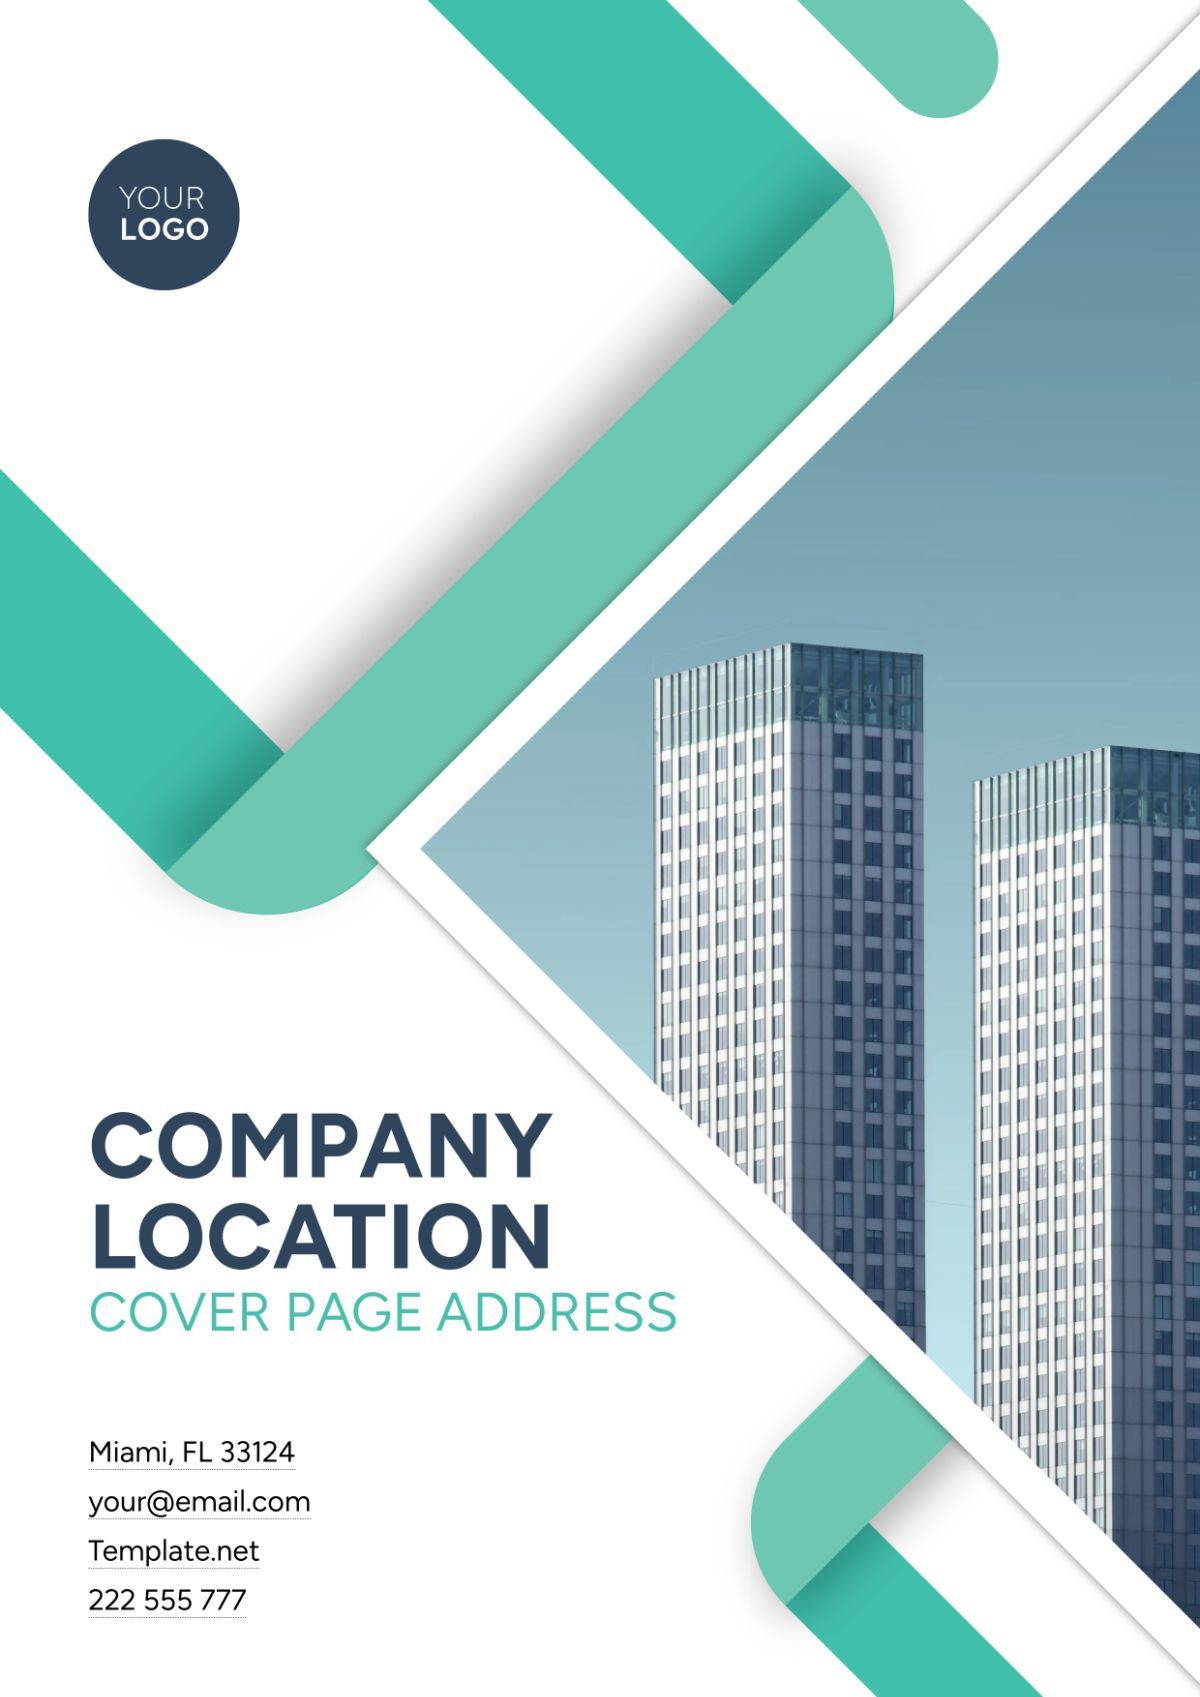 Free Company Location Cover Page Address Template